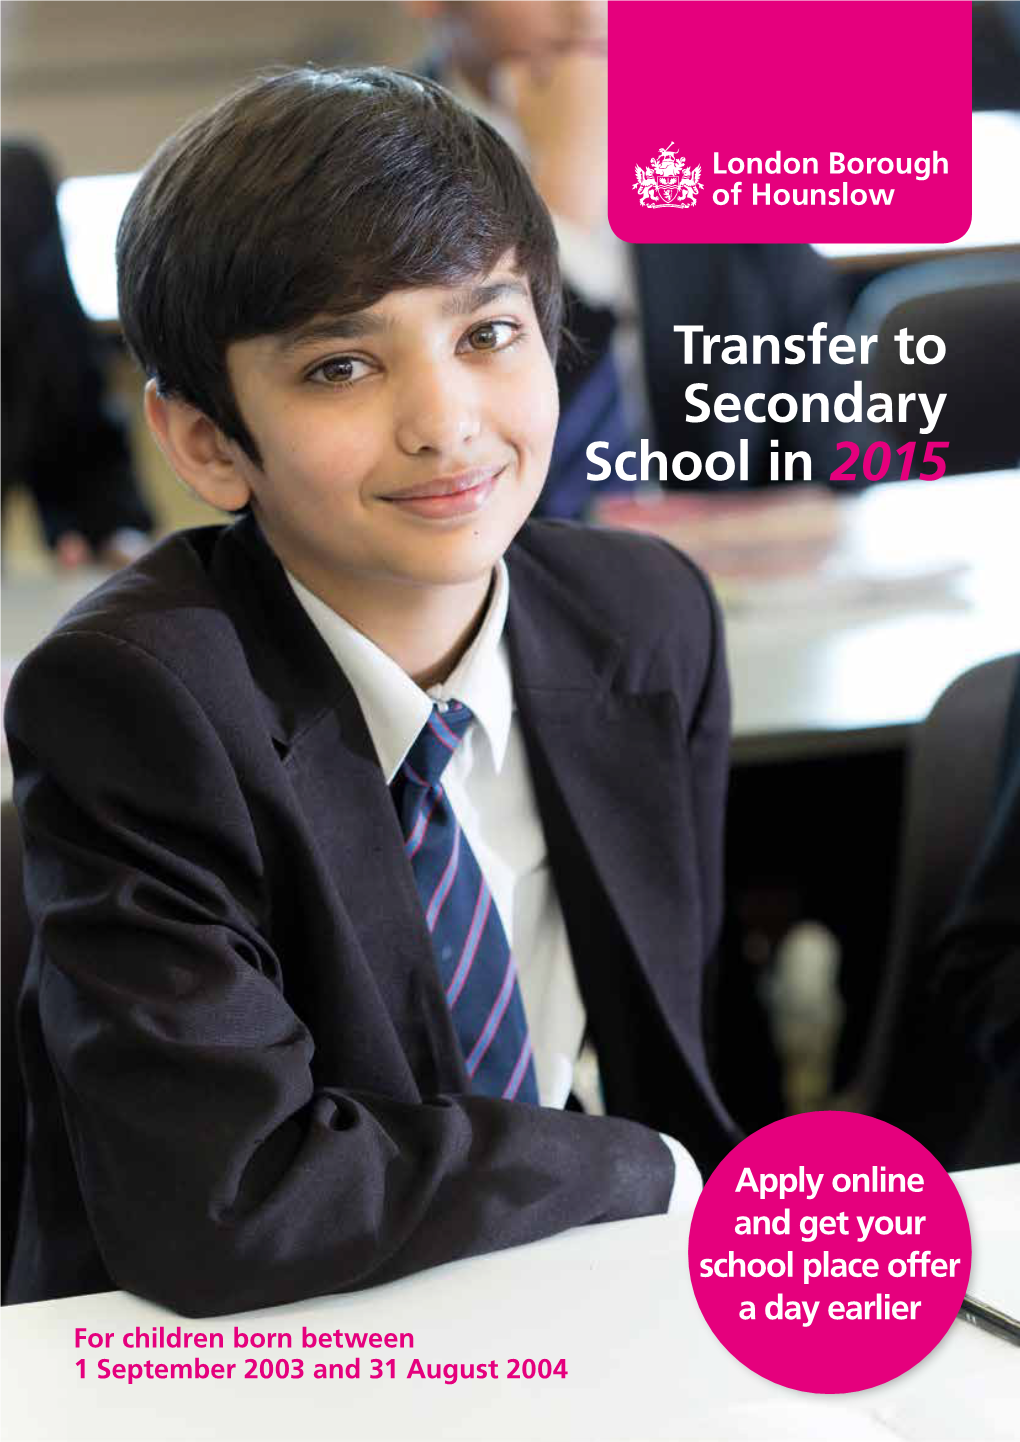 Transfer to Secondary School in 2015